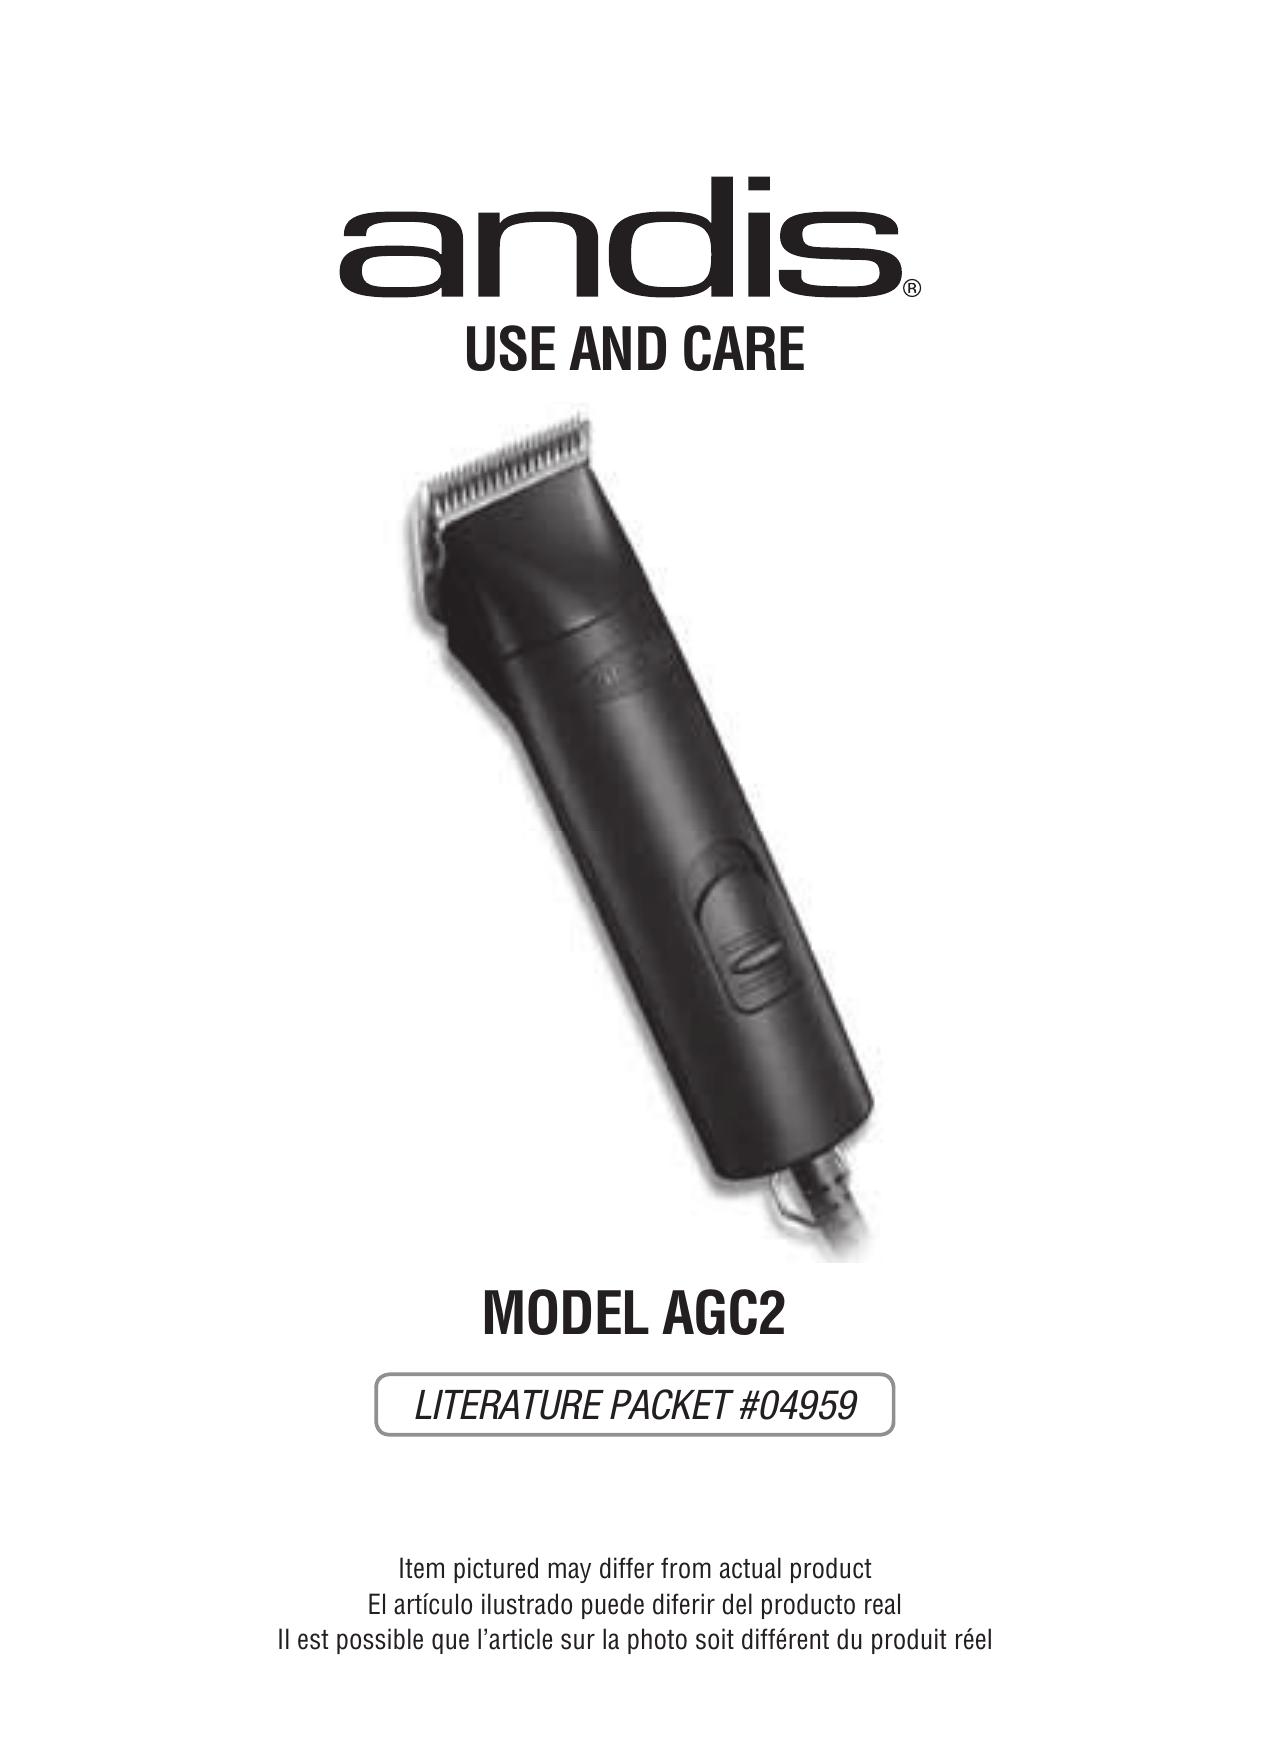 Andis Company AGC2 Electric Shaver User Manual